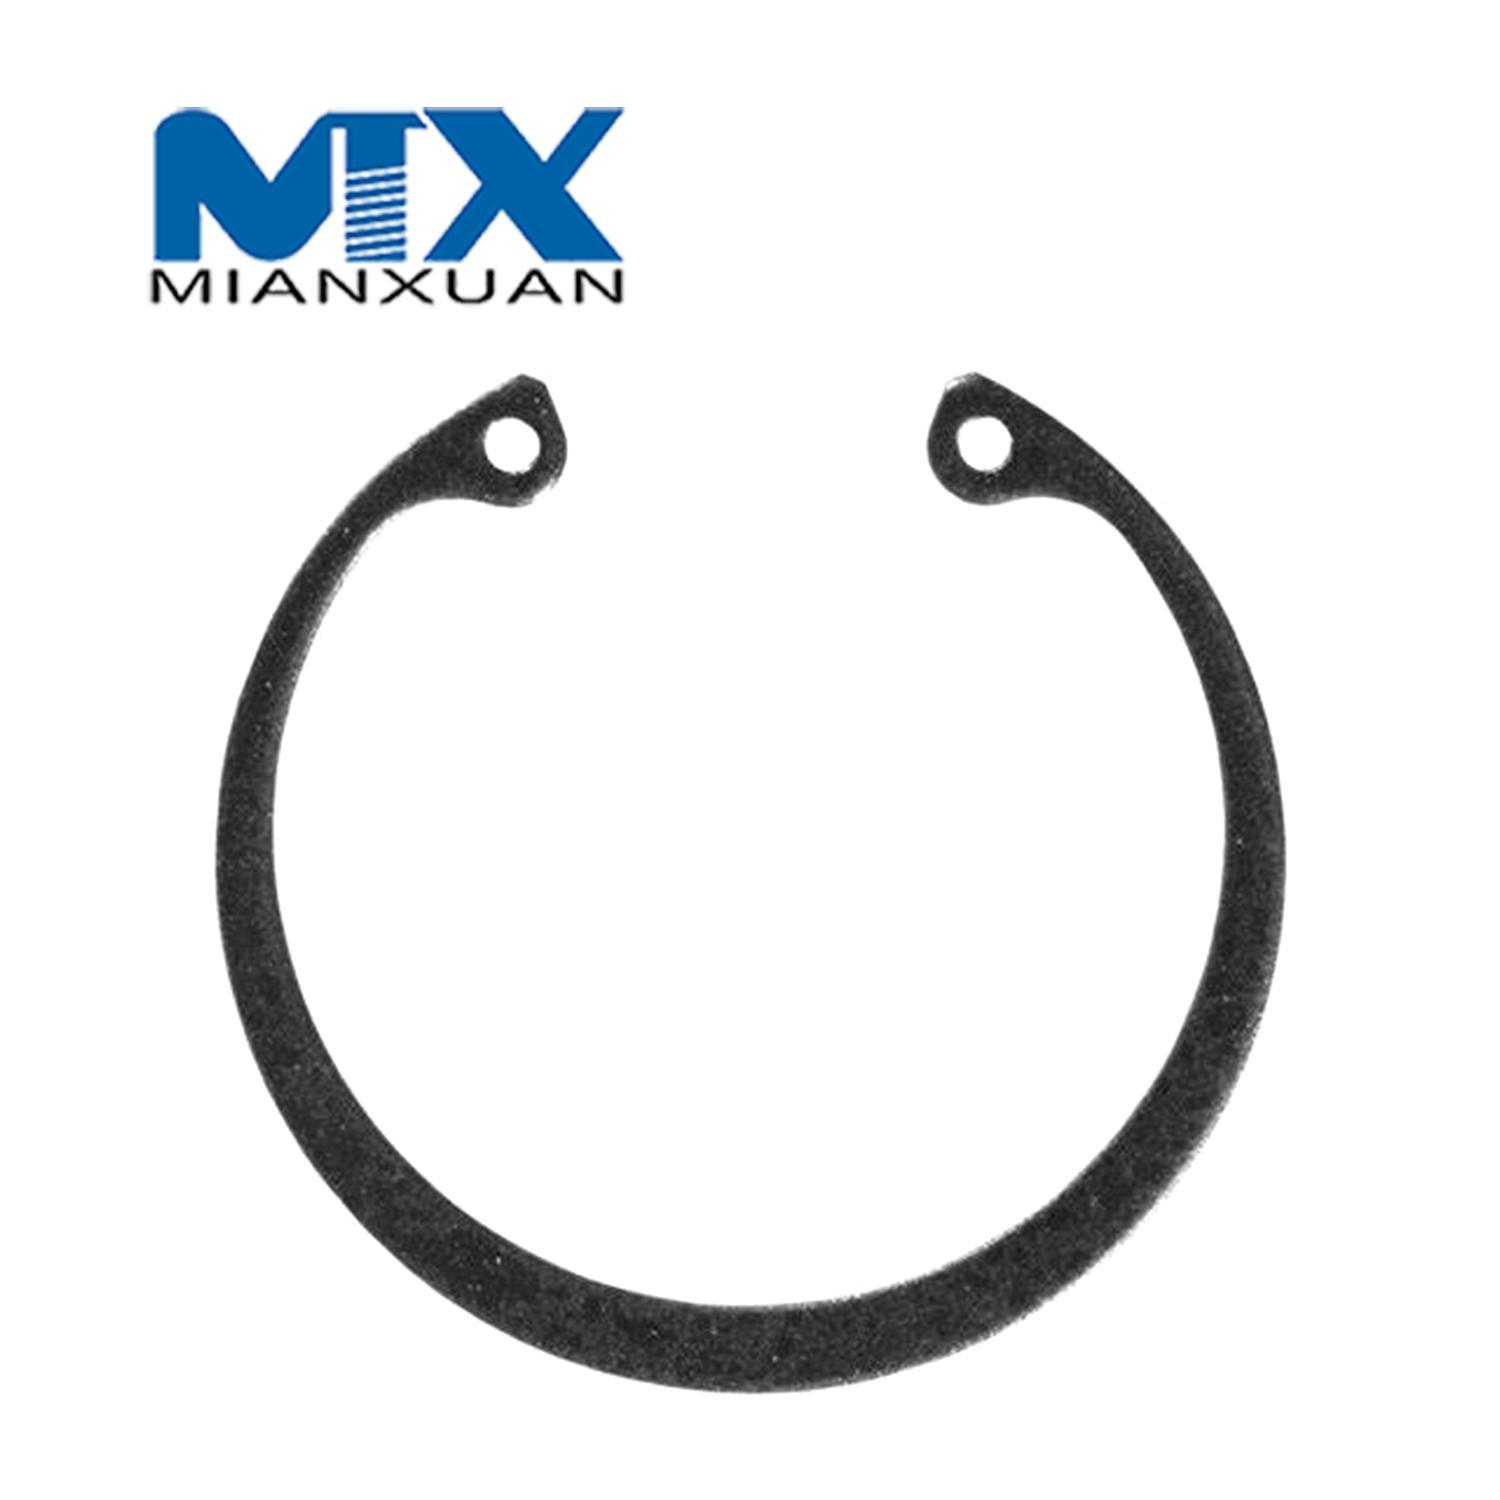 Steel Plate Punching Fastener Retaining Ring for Universal Joint